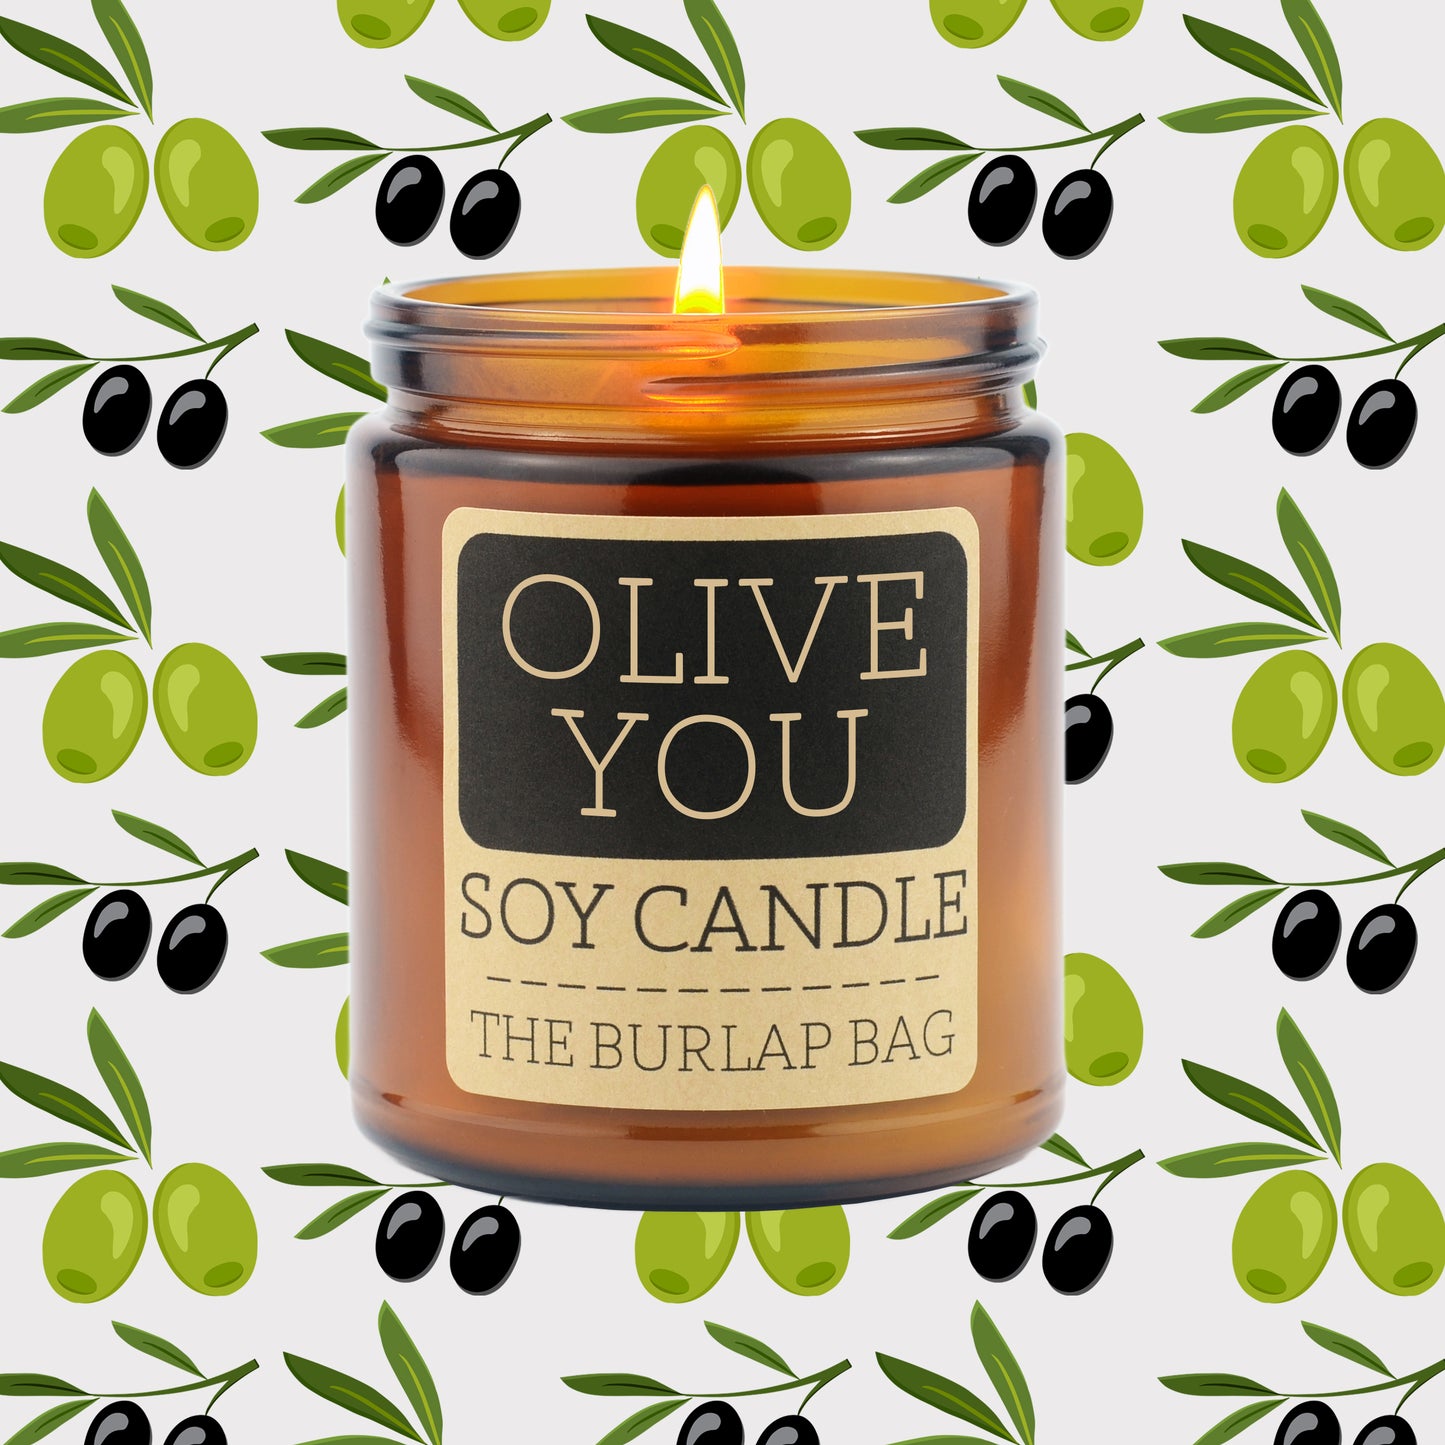 Olive You - Soy Candle 9oz